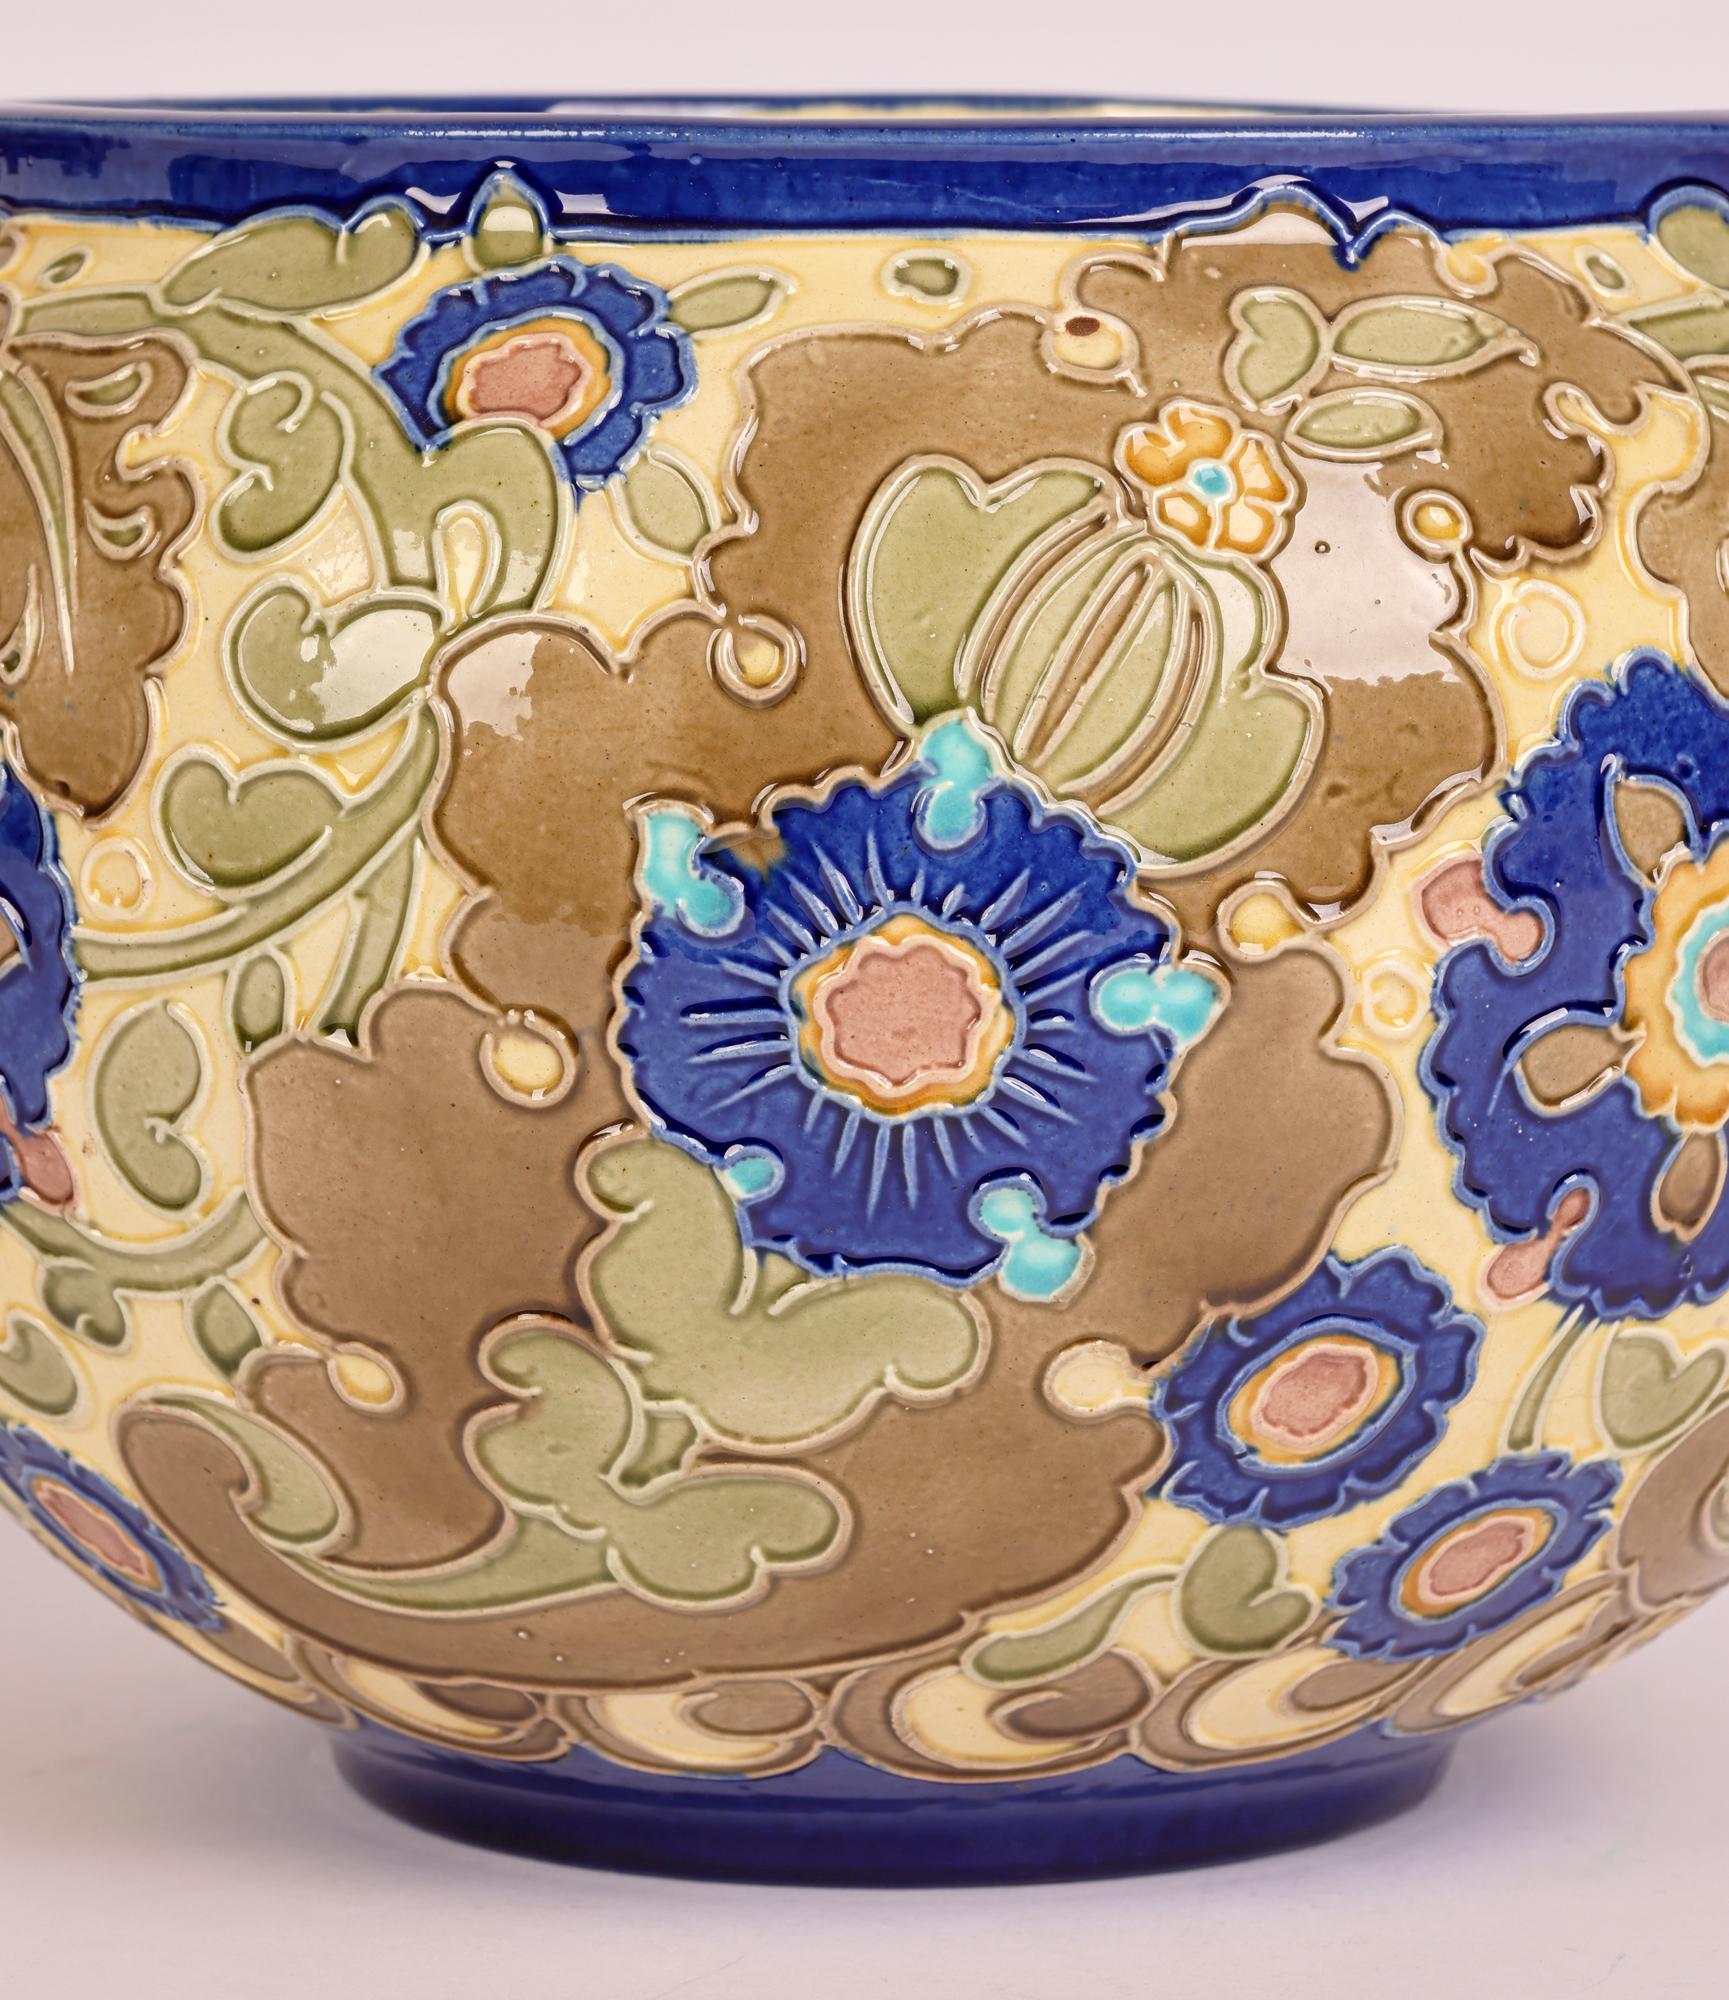 A large Burmantofts Faience partie-color pottery planter with scrolling floral designs dating from around 1895. The round earthenware planter stands on narrow round foot with a recessed base and has a wide round shape body narrowing slightly to a